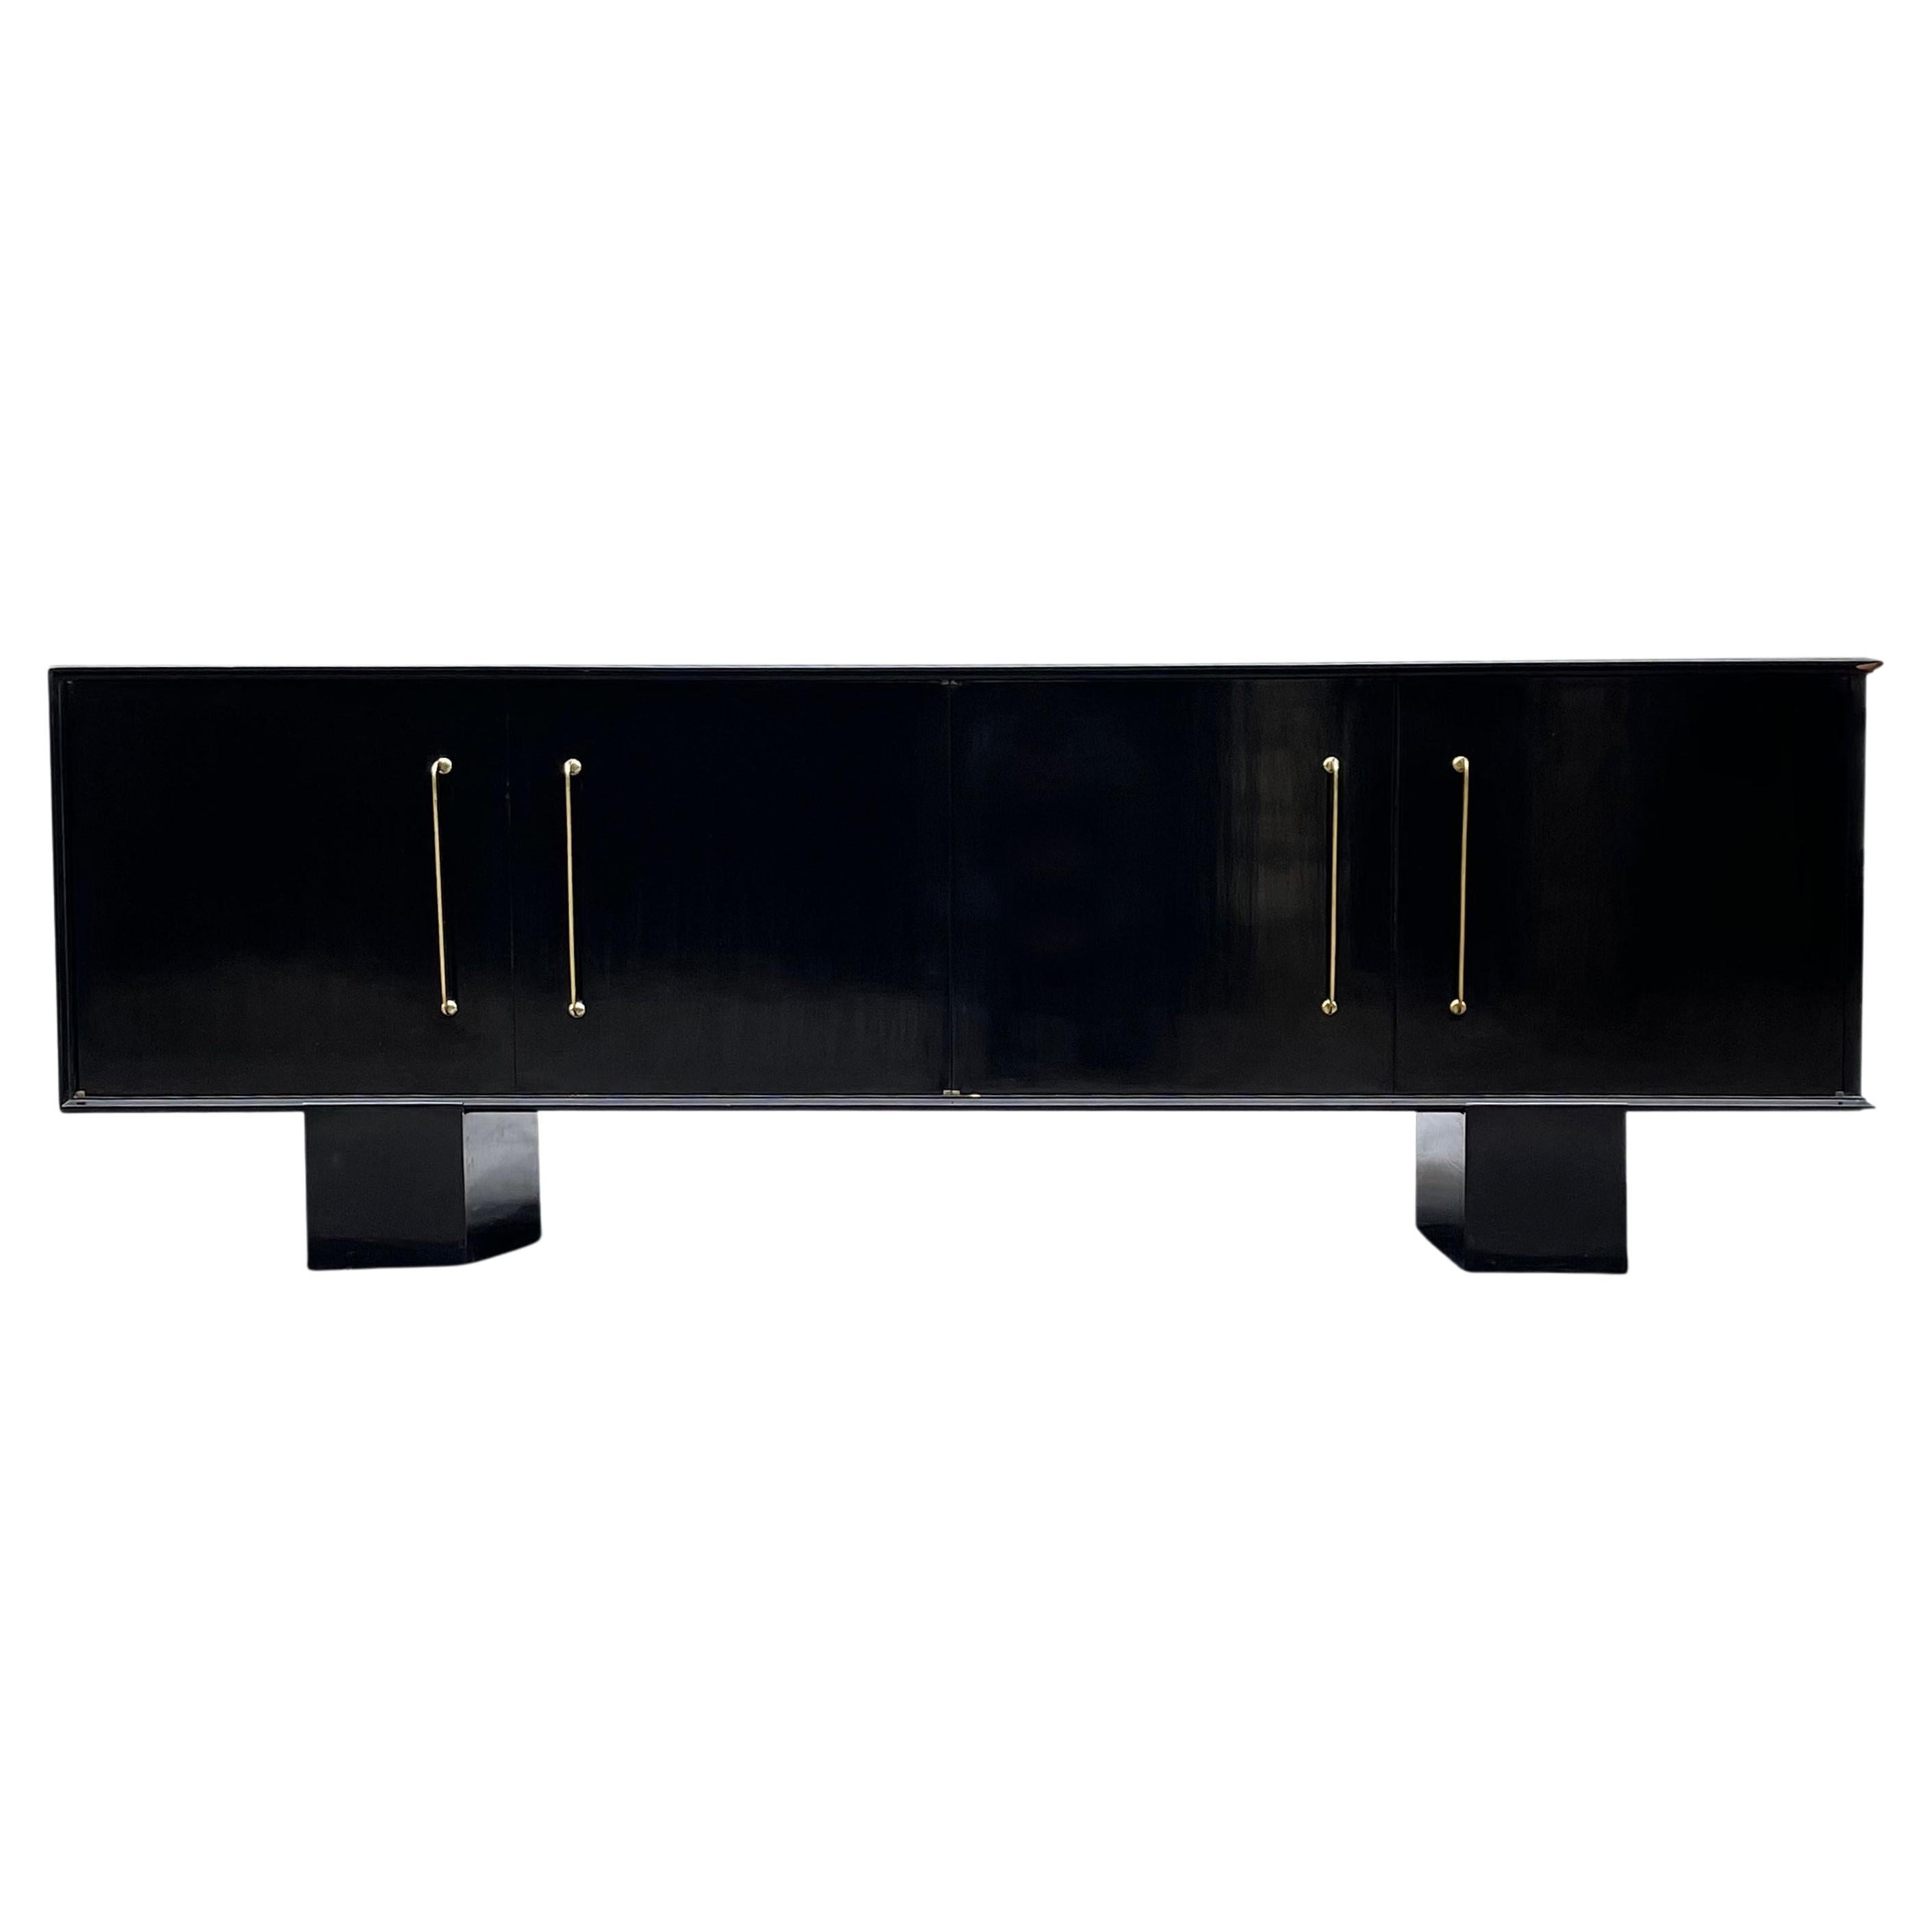 Modernist Art Deco Sideboard Attributed to Jacques Adnet, circa 1940